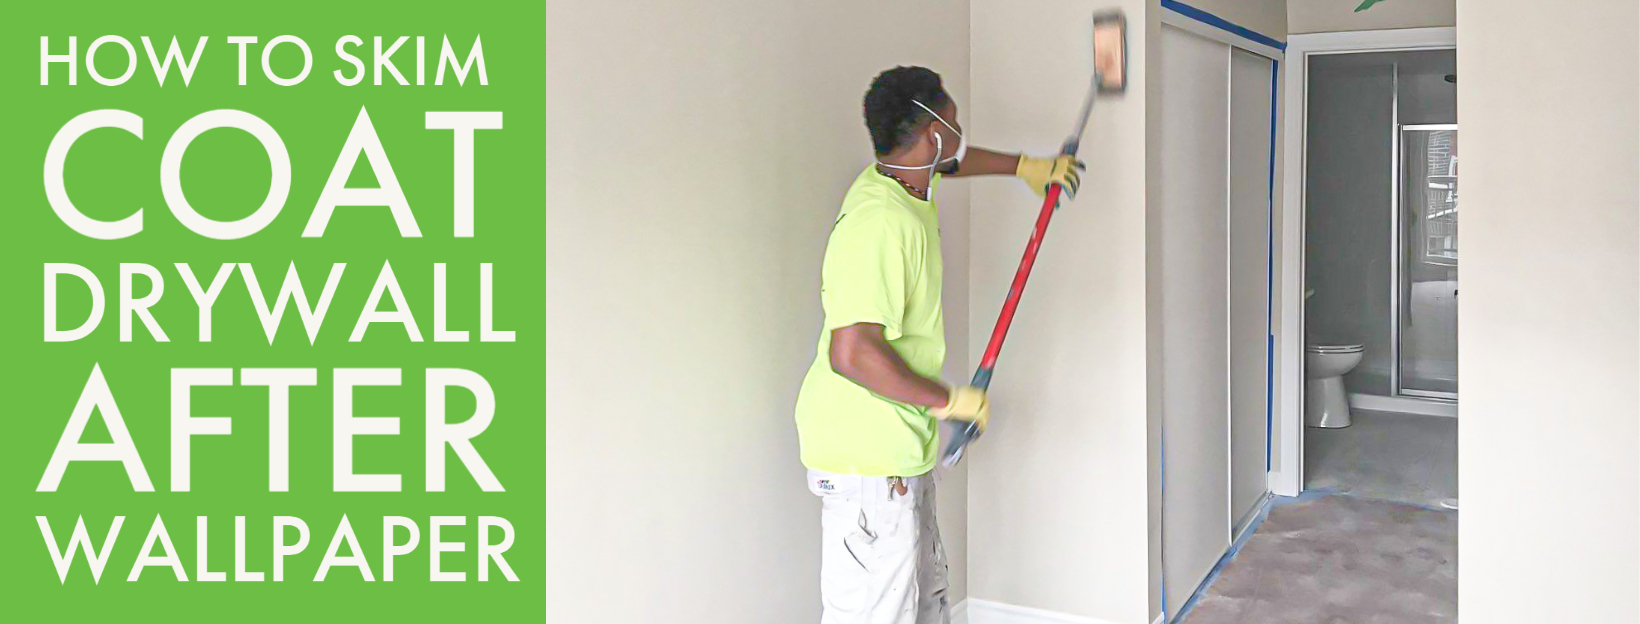 How to Skim Coat Drywall After Wallpaper - Home Painters Toronto